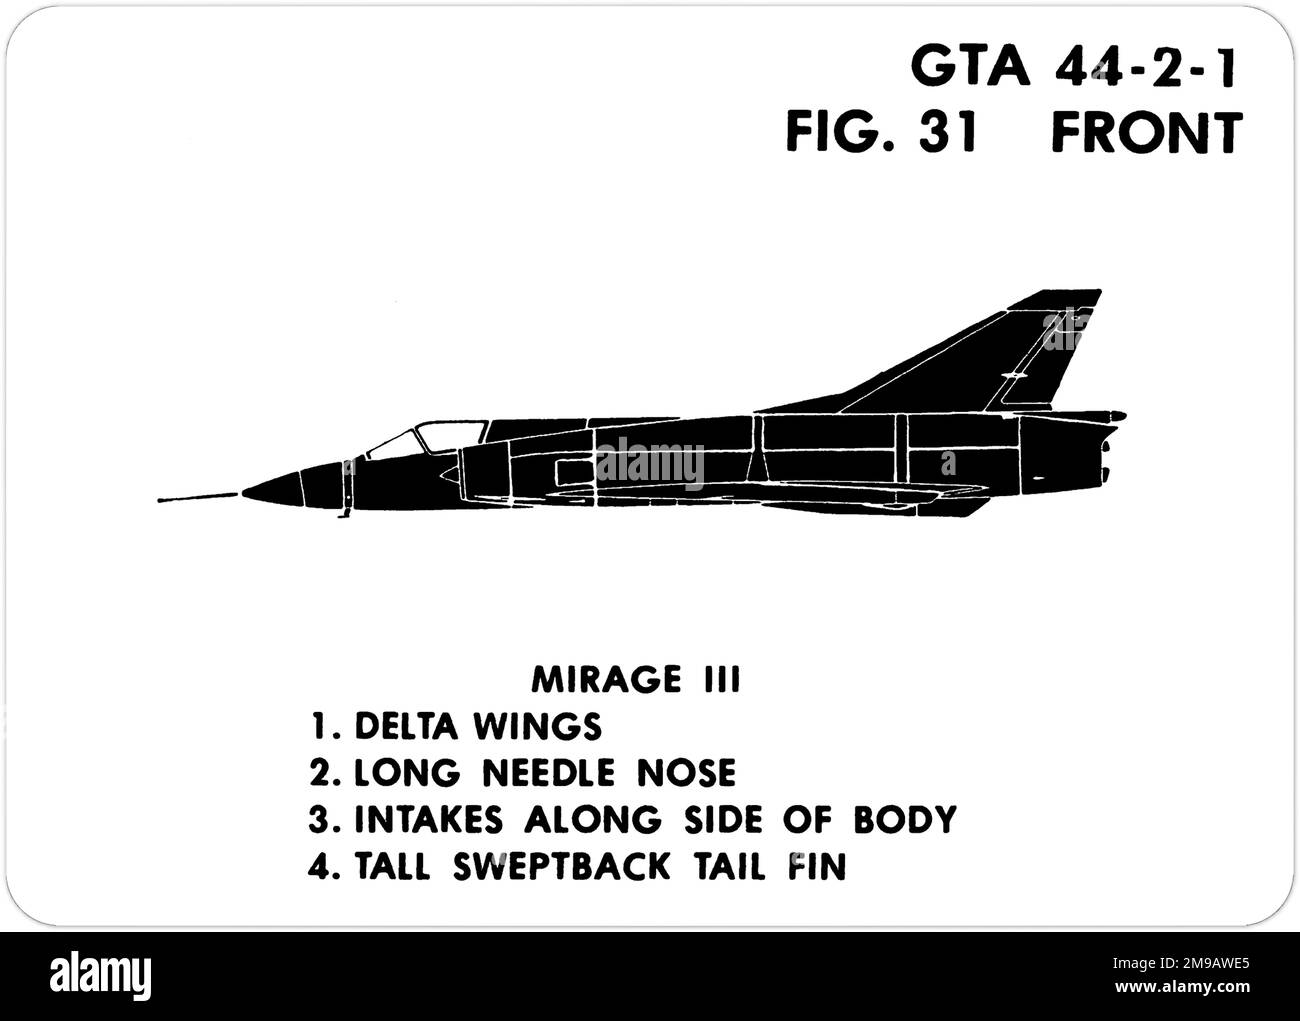 Dassault Mirage IIIC. This is one of the series of Graphics Training Aids (GTA) used by the United States Army to train their personnel to recognize friendly and hostile aircraft. This particular set, GTA 44-2-1, was issued in July1977. The set features aircraft from: Canada, Italy, United Kingdom, United States, and the USSR. Stock Photo